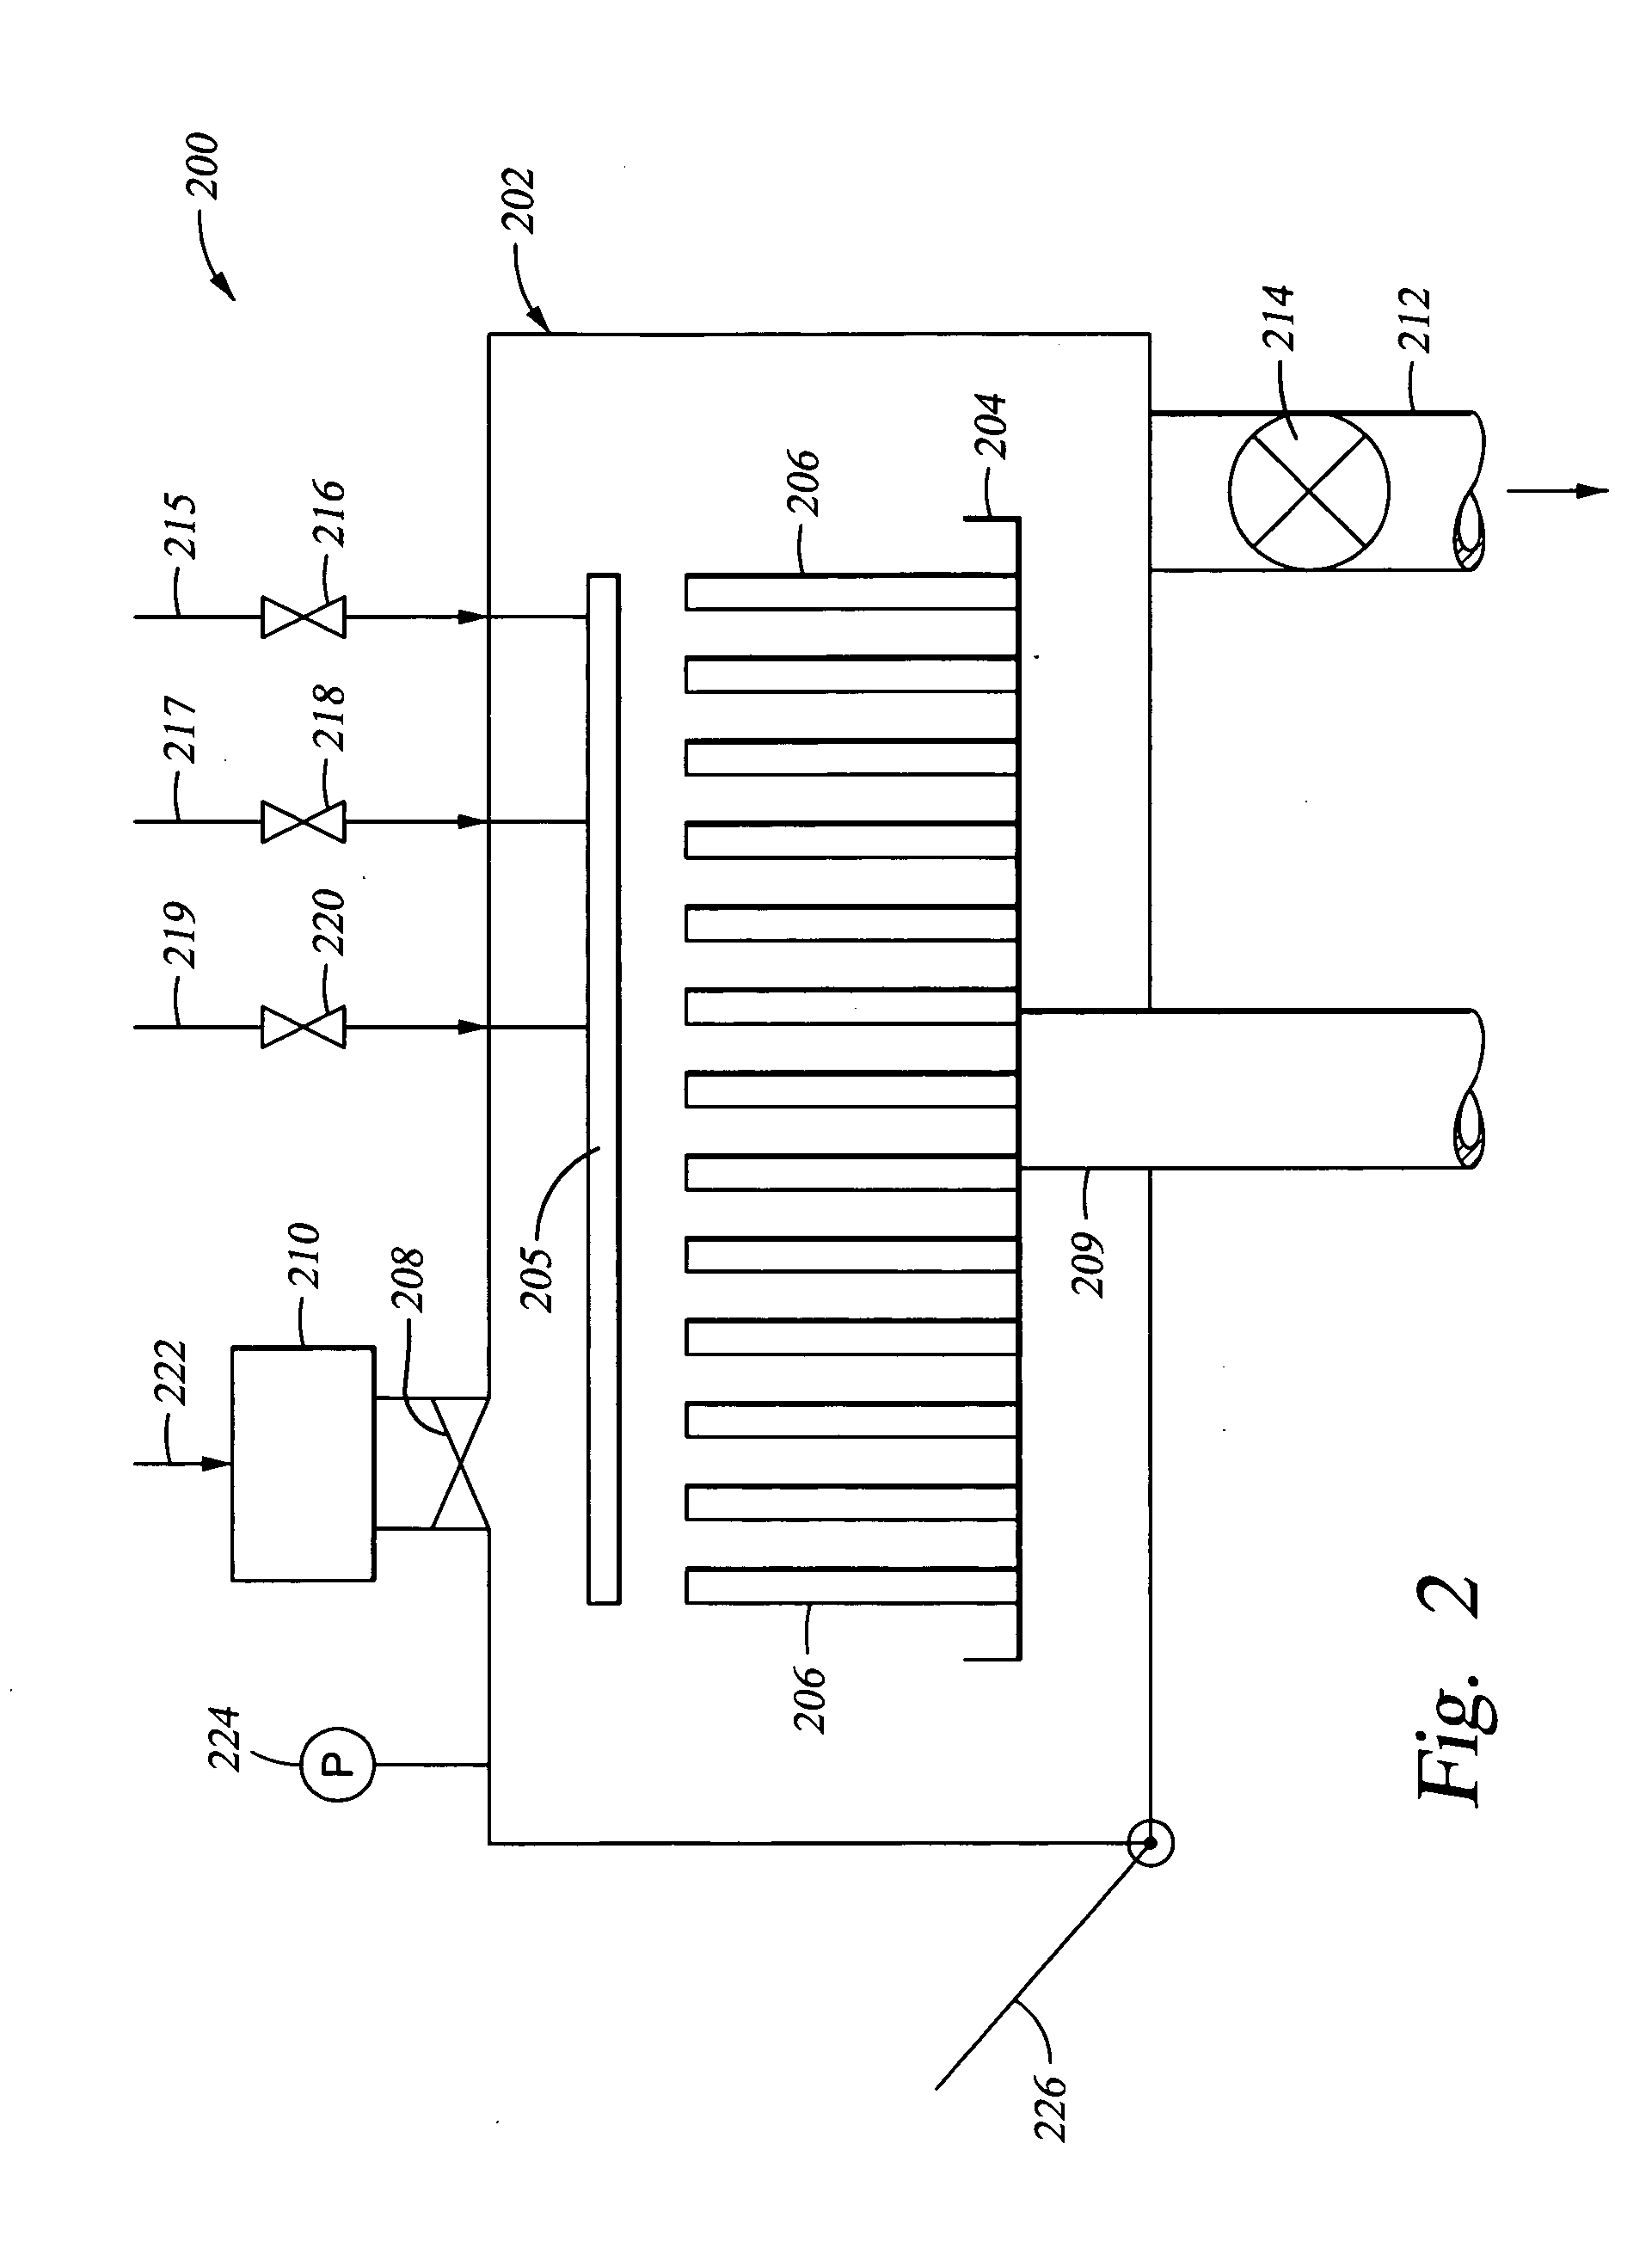 Apparatus and method for controlled application of reactive vapors to produce thin films and coatings